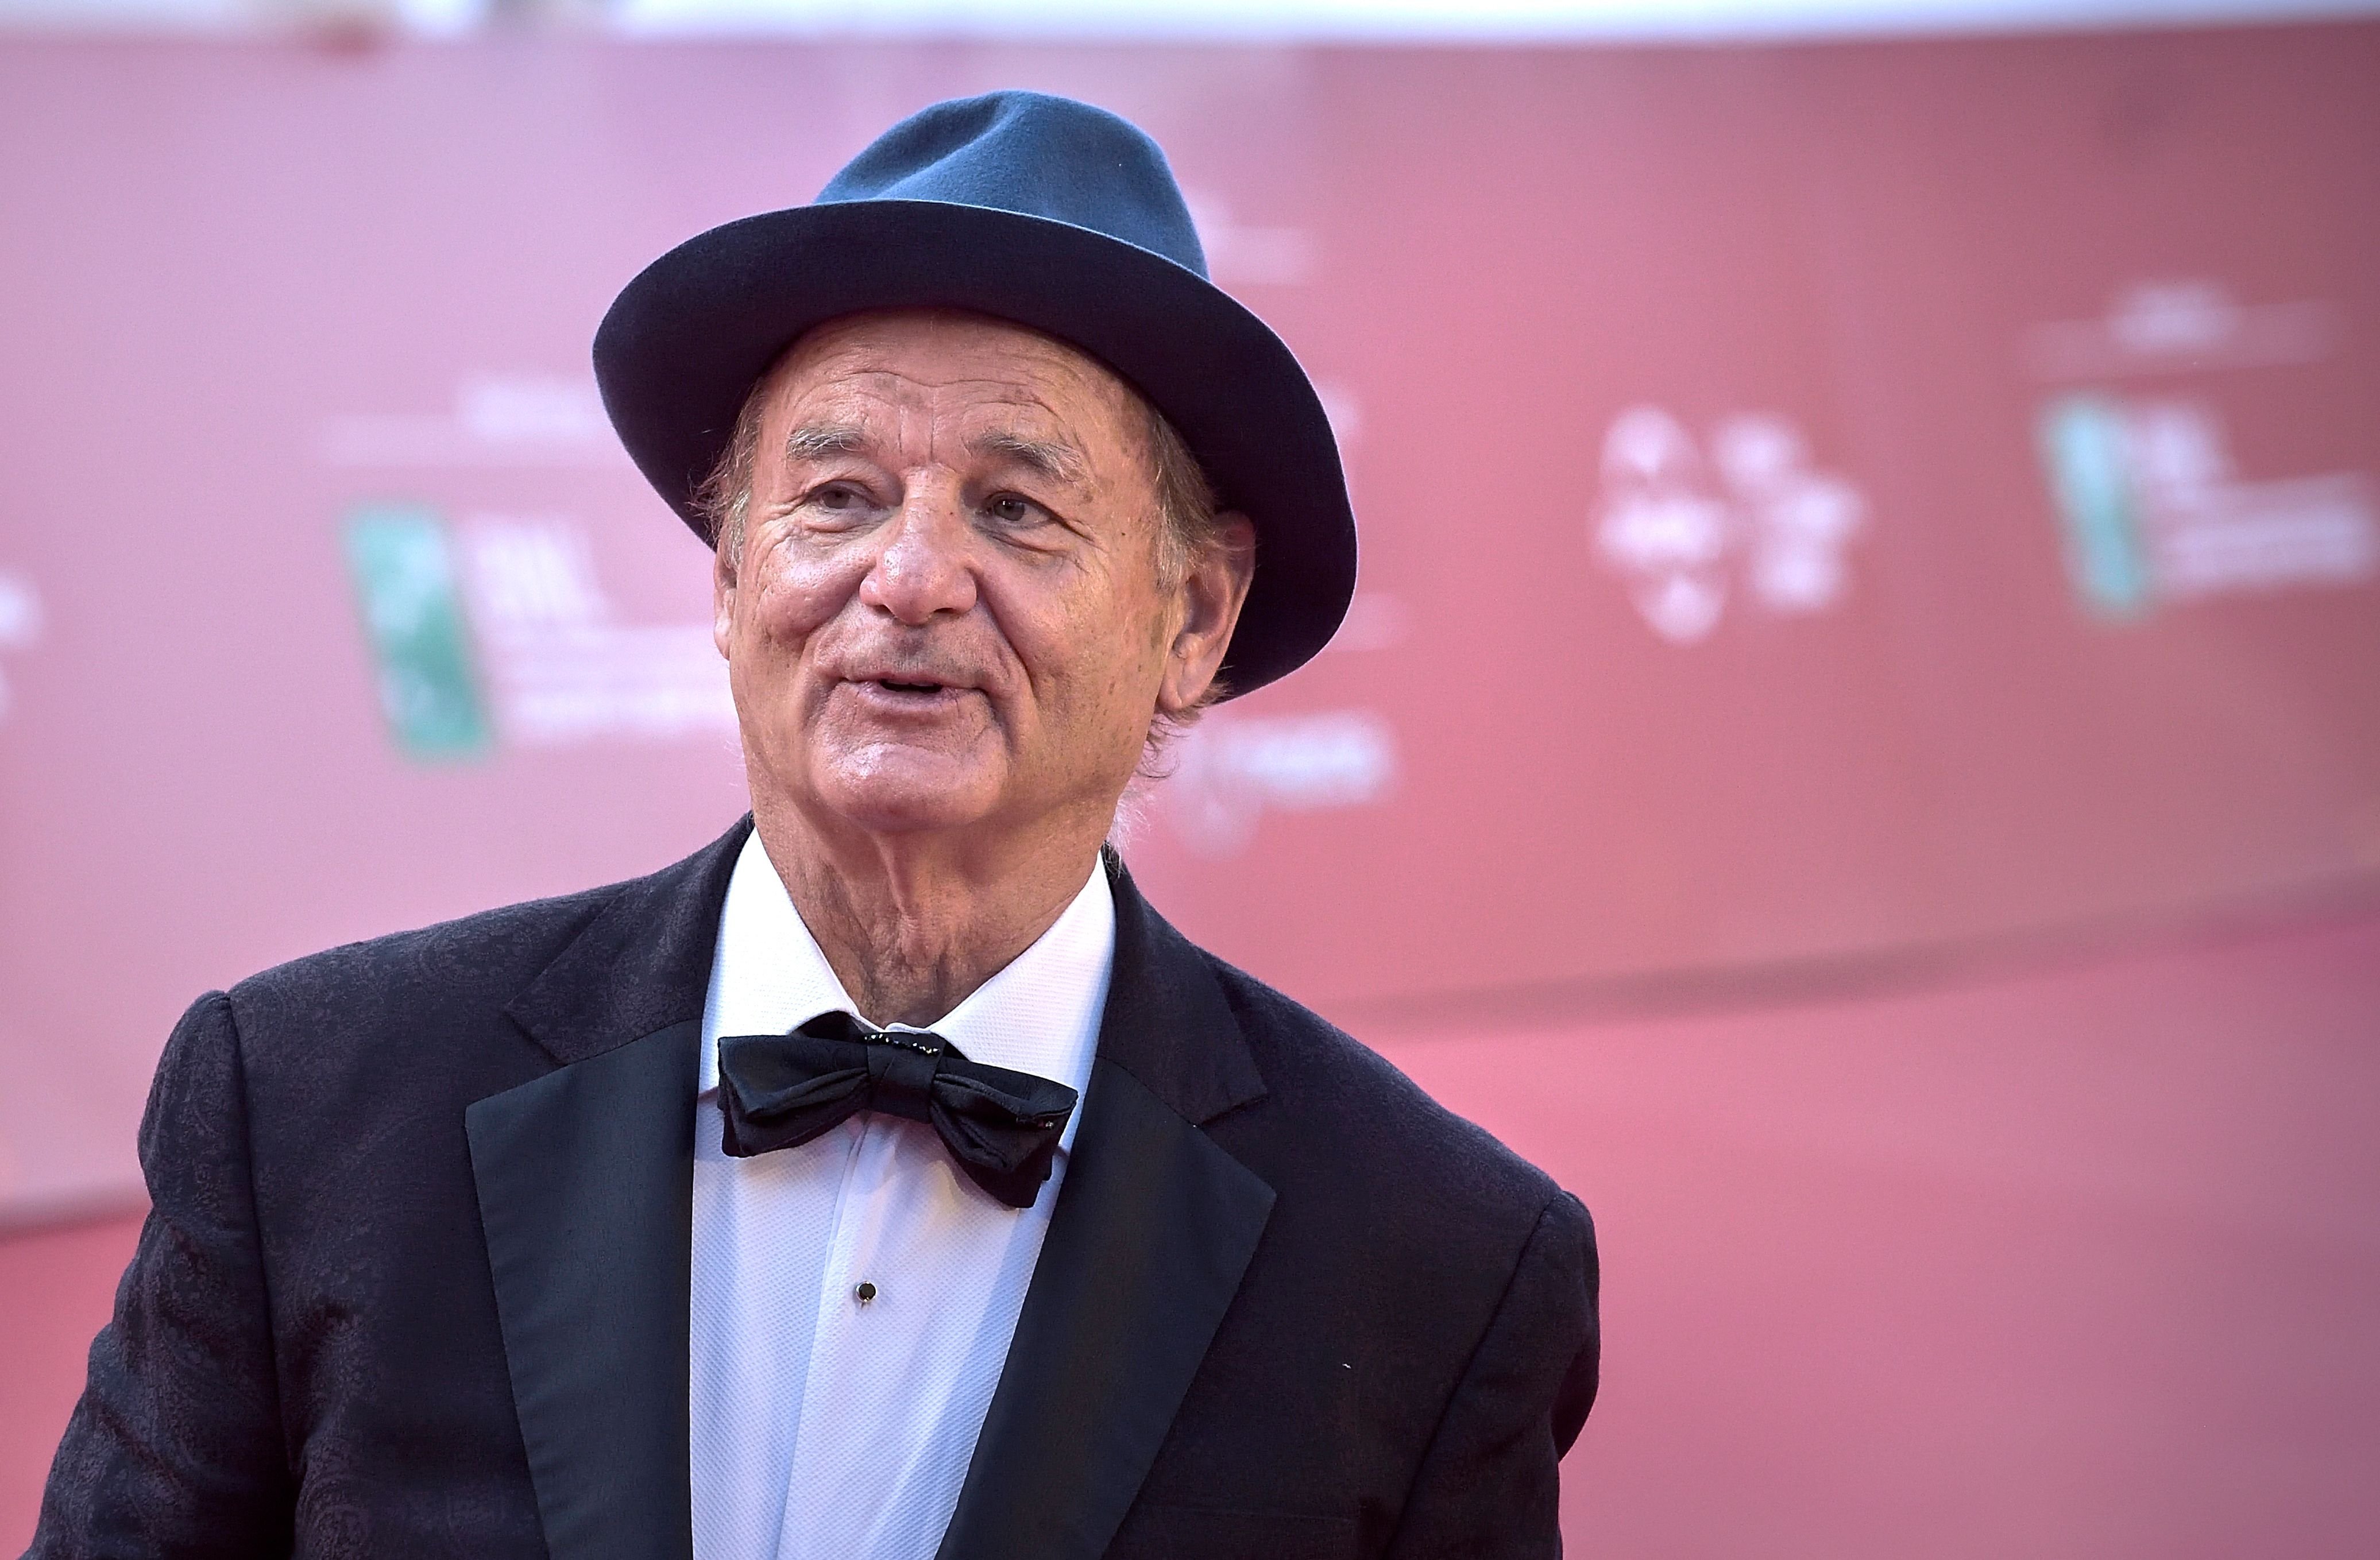 Bill Murray at the 2019 Rome Film Festival, Rome, Italy, October 19, 2019. | Source: Getty Images